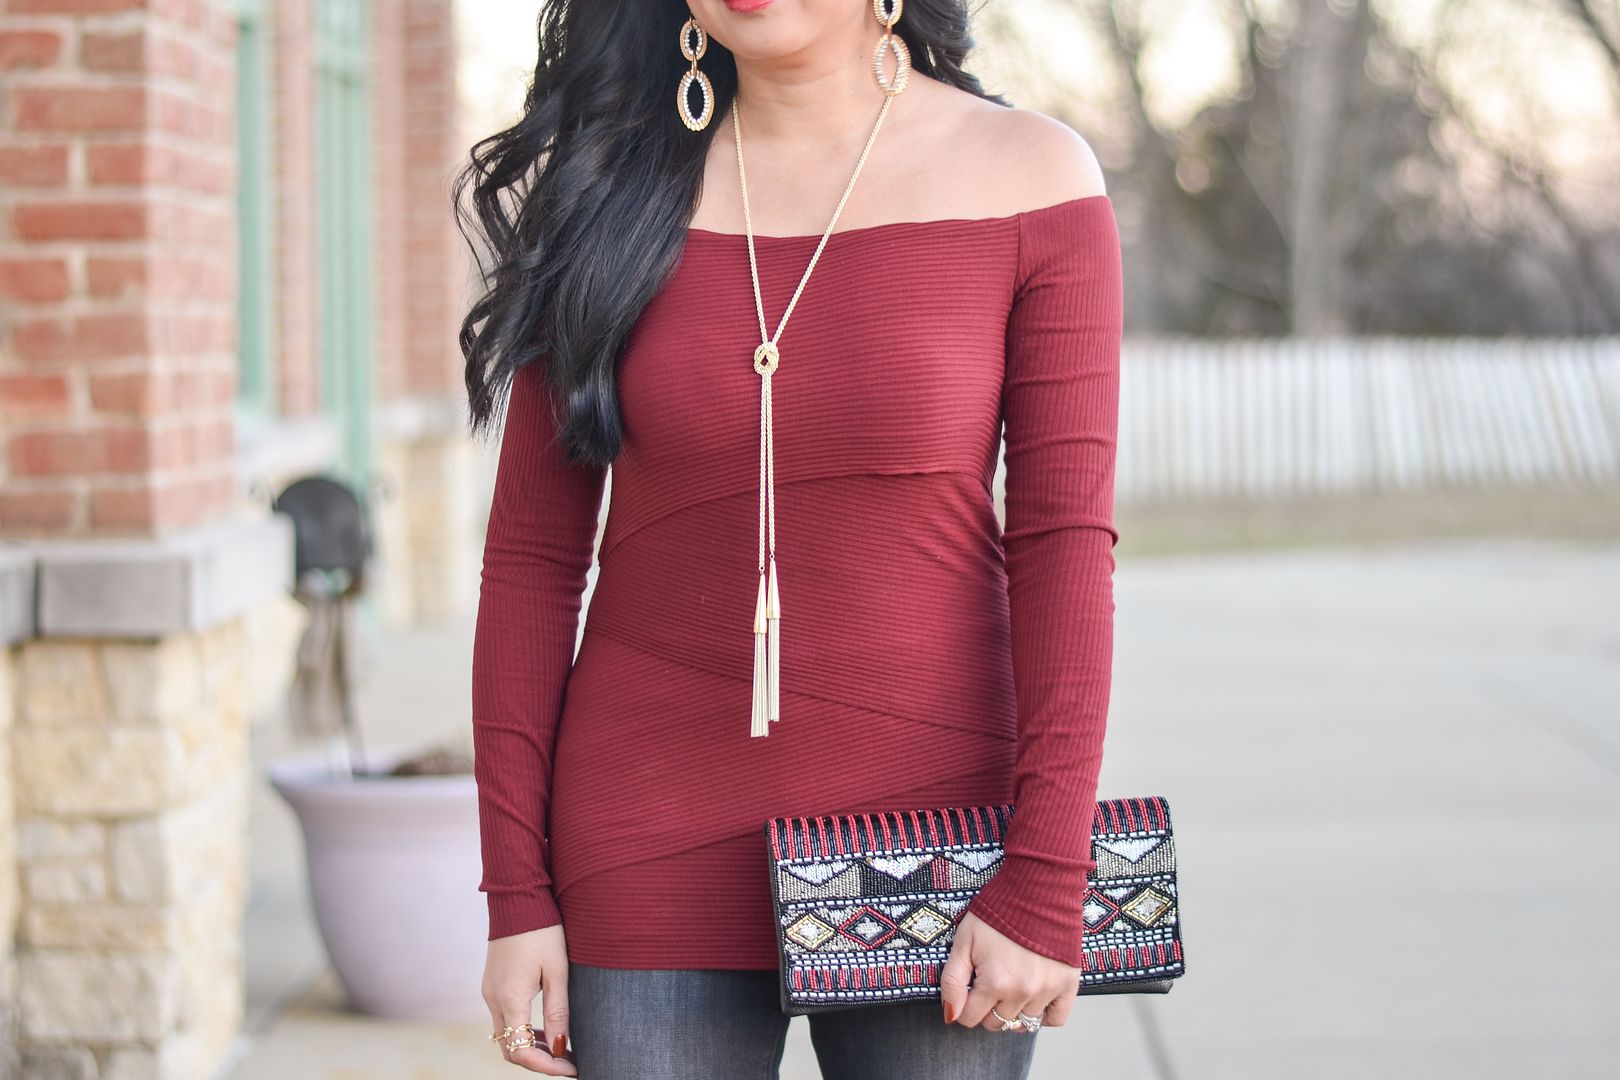 Bailey 44 Love Off the Shoulder top, Kendra Scott Phara necklace